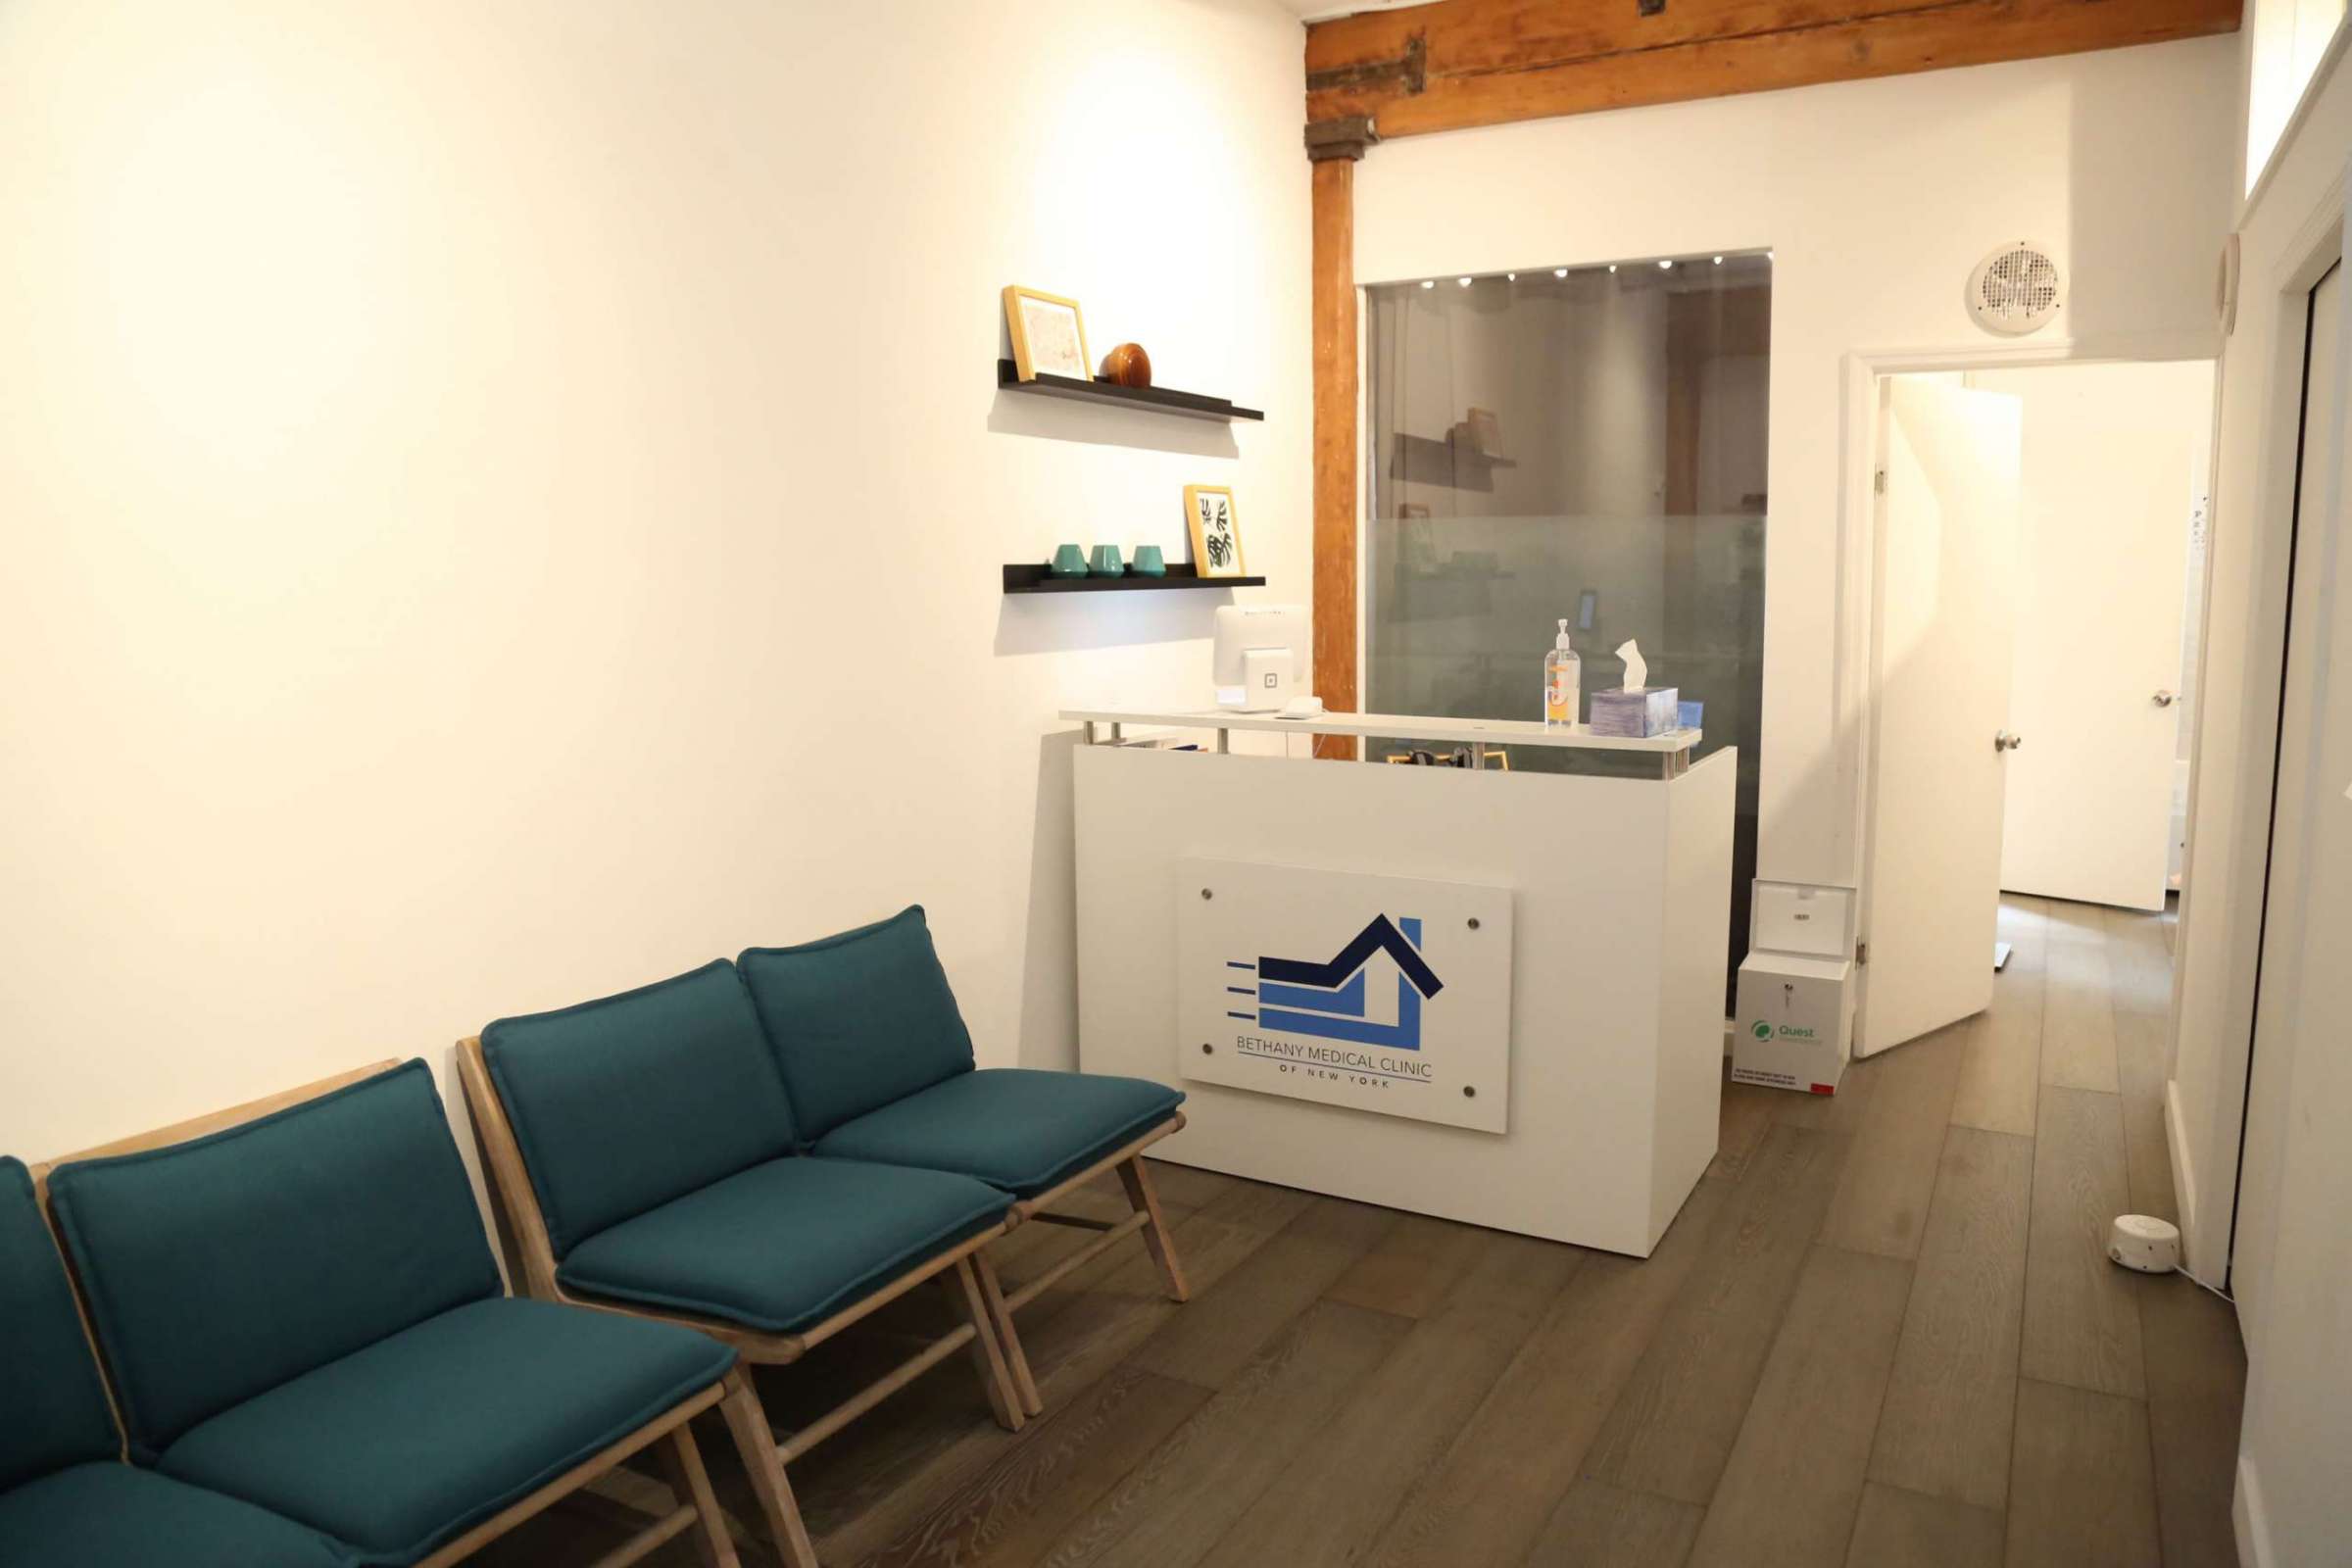 Image of the reception area at Chelsea Clinic specializing in Cosmetic Injectables.